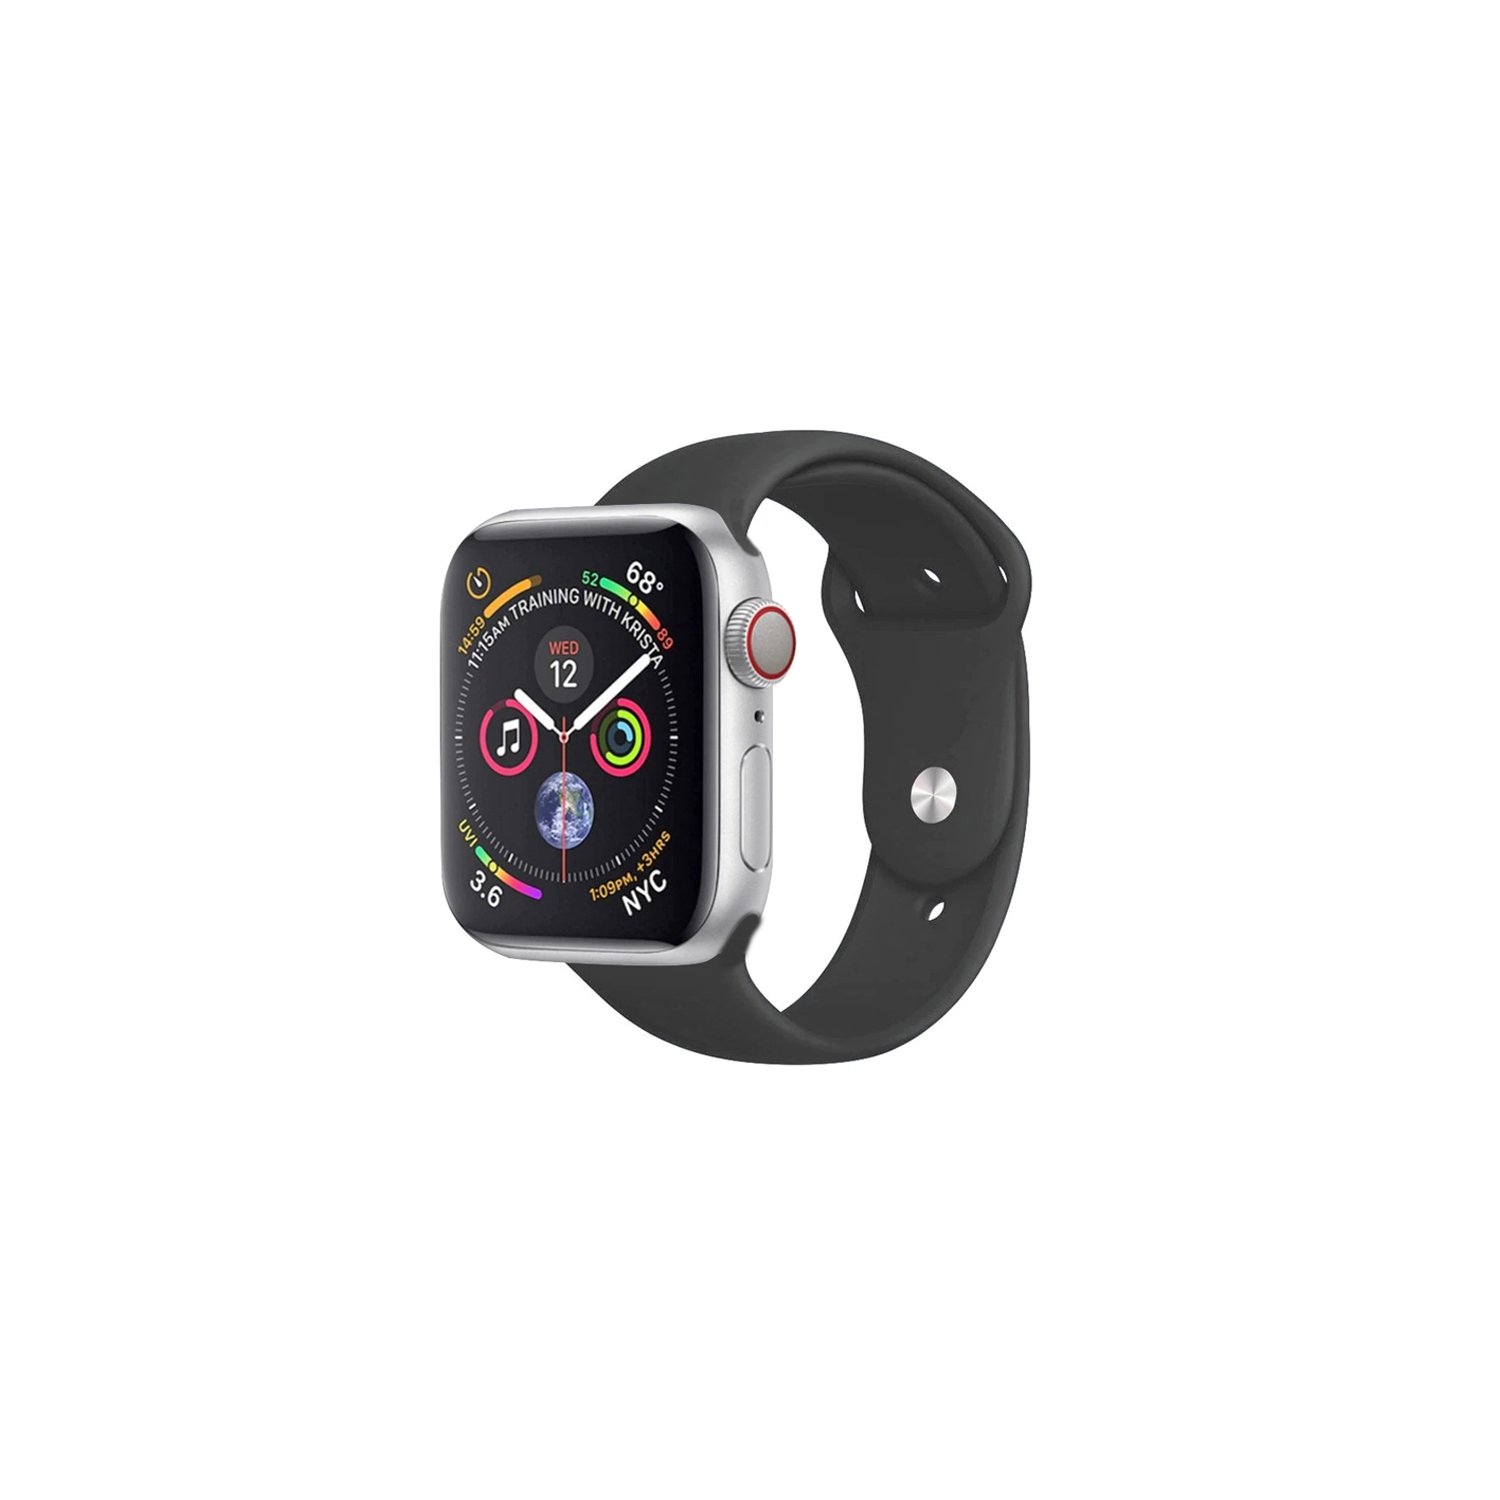 Watch Strap Silicone Sports Band Bracelet M/L Size For Apple iWatch Series 42mm/44mm - Black